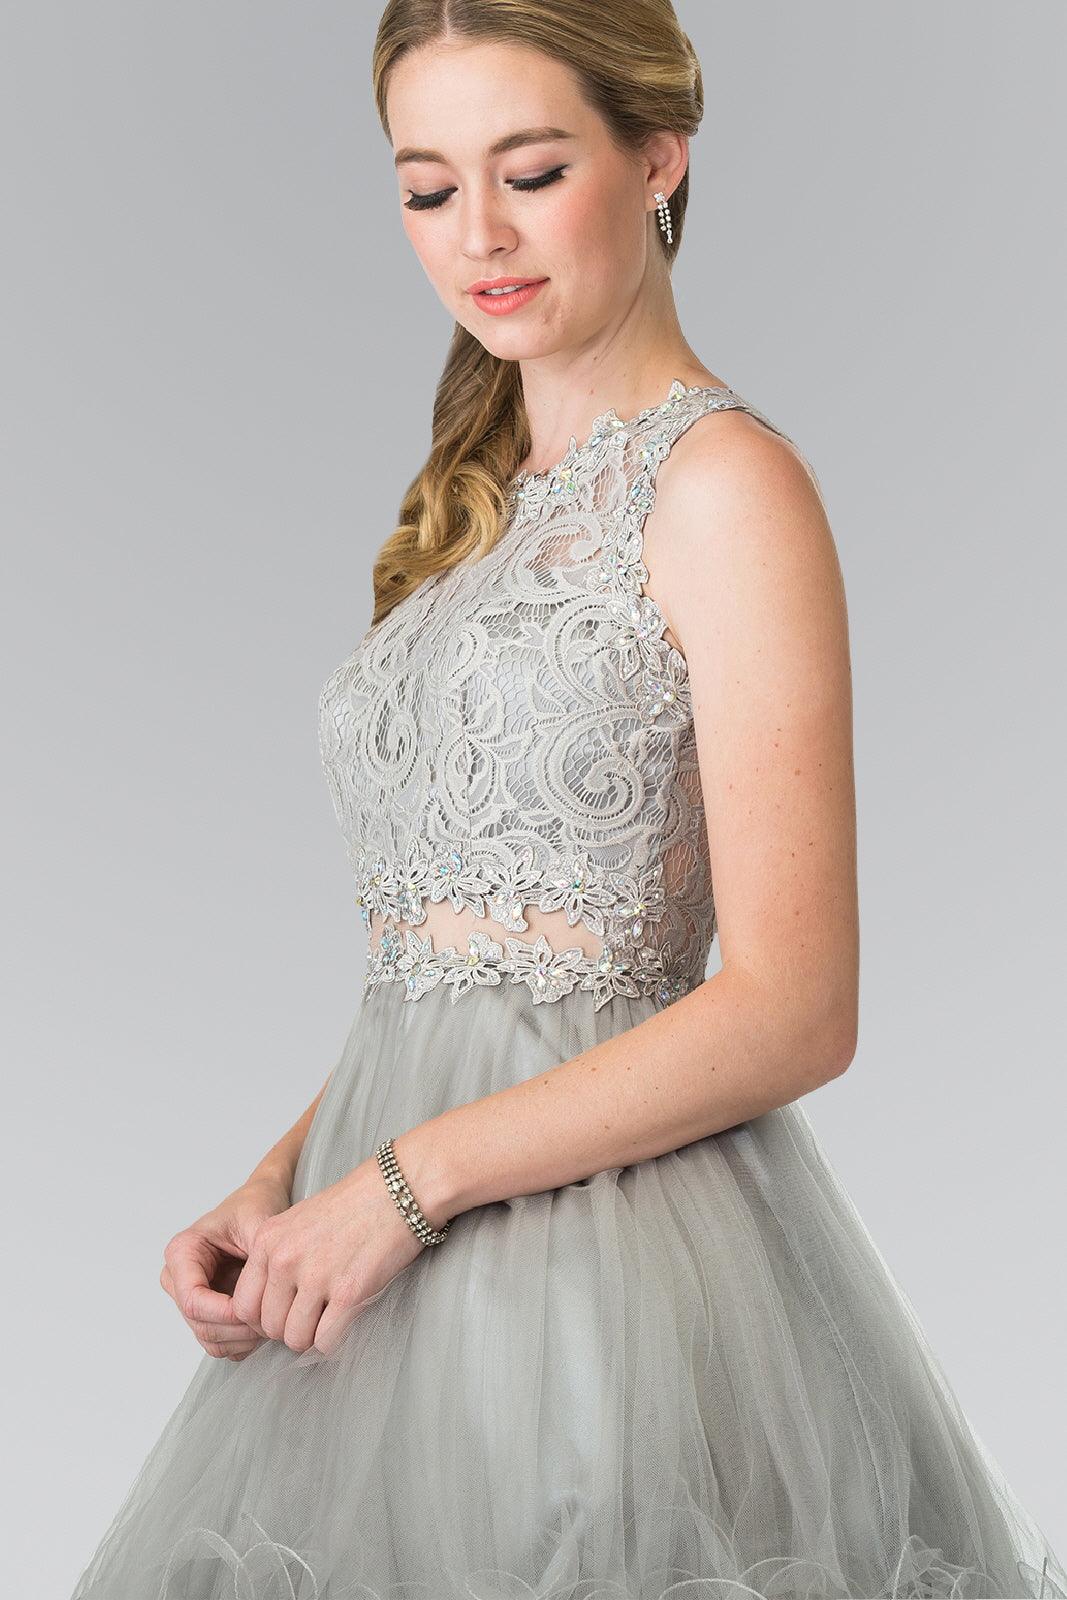 Short Prom Sleeveless Cocktail Dress Sale - The Dress Outlet